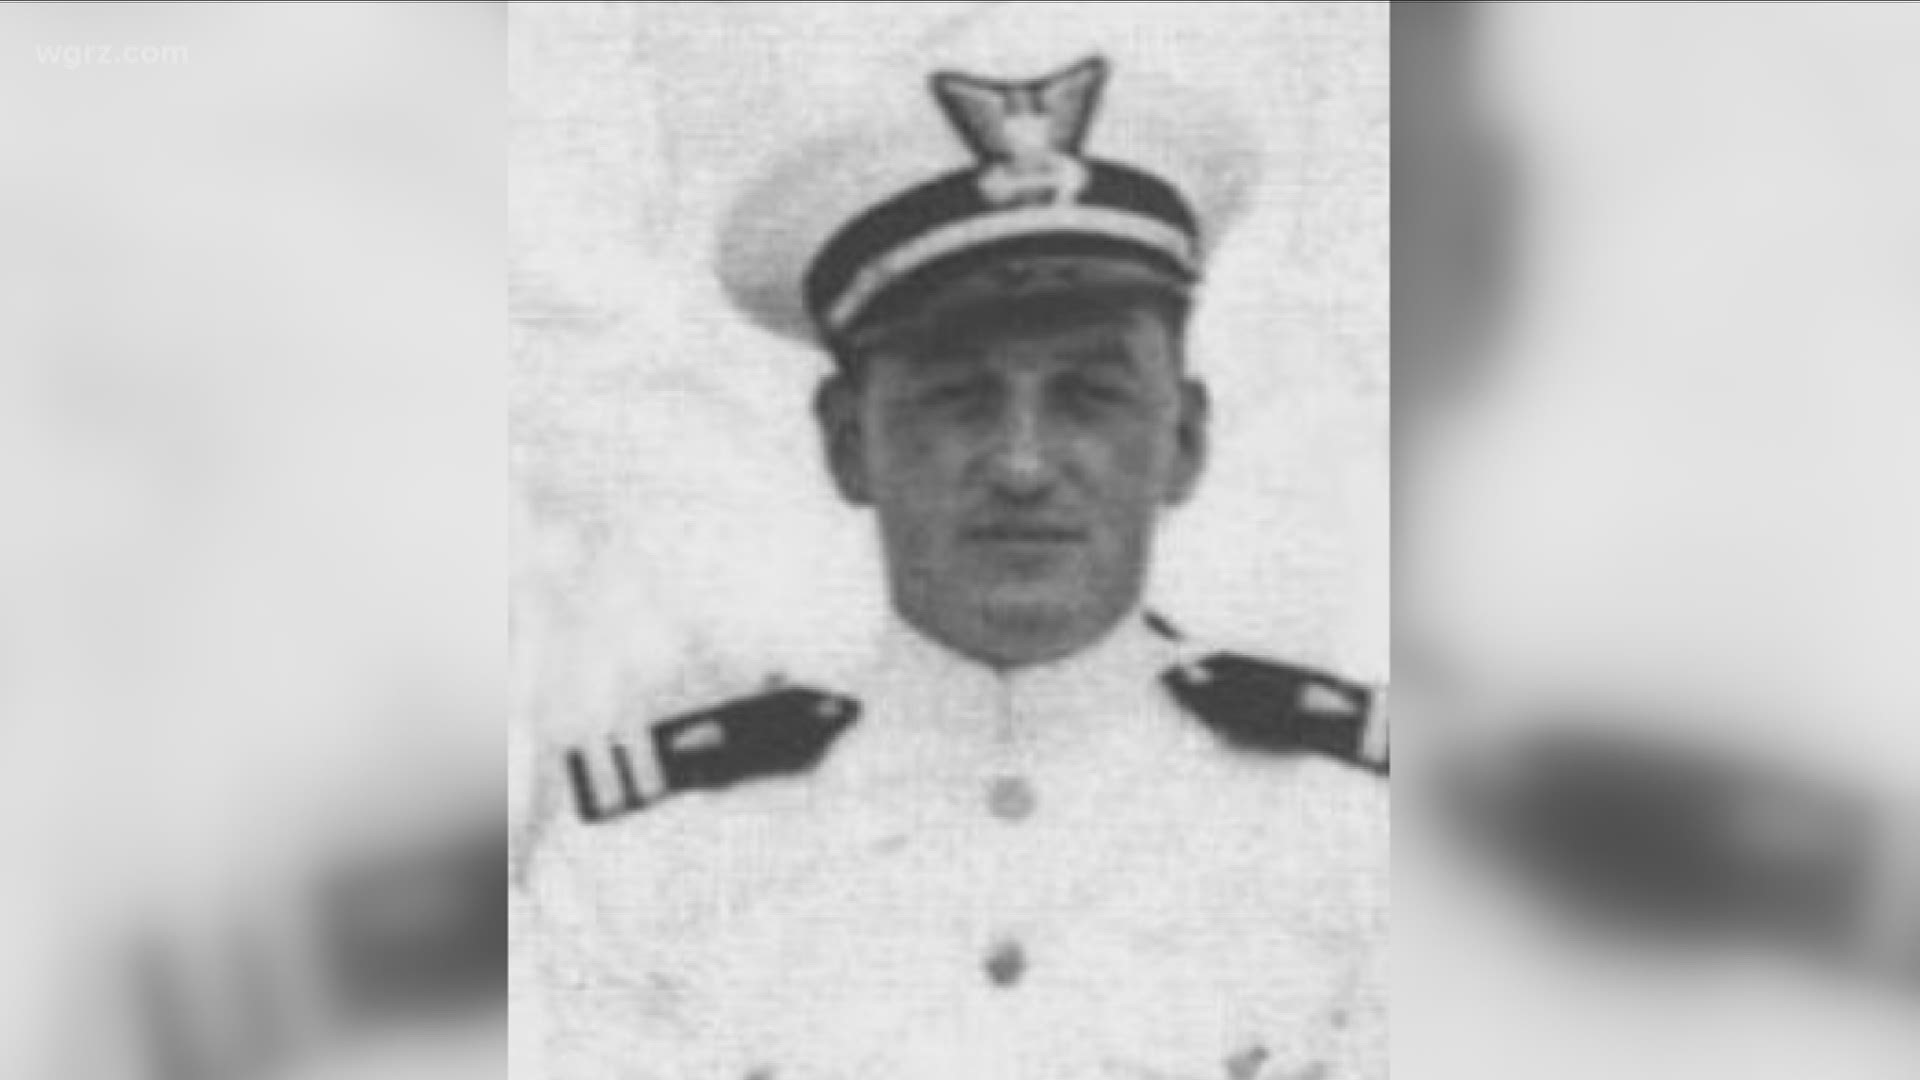 Coast Guard Lieutenant Thomas Crotty's remains were part of a mass grave that was exhumed in the Philippines.